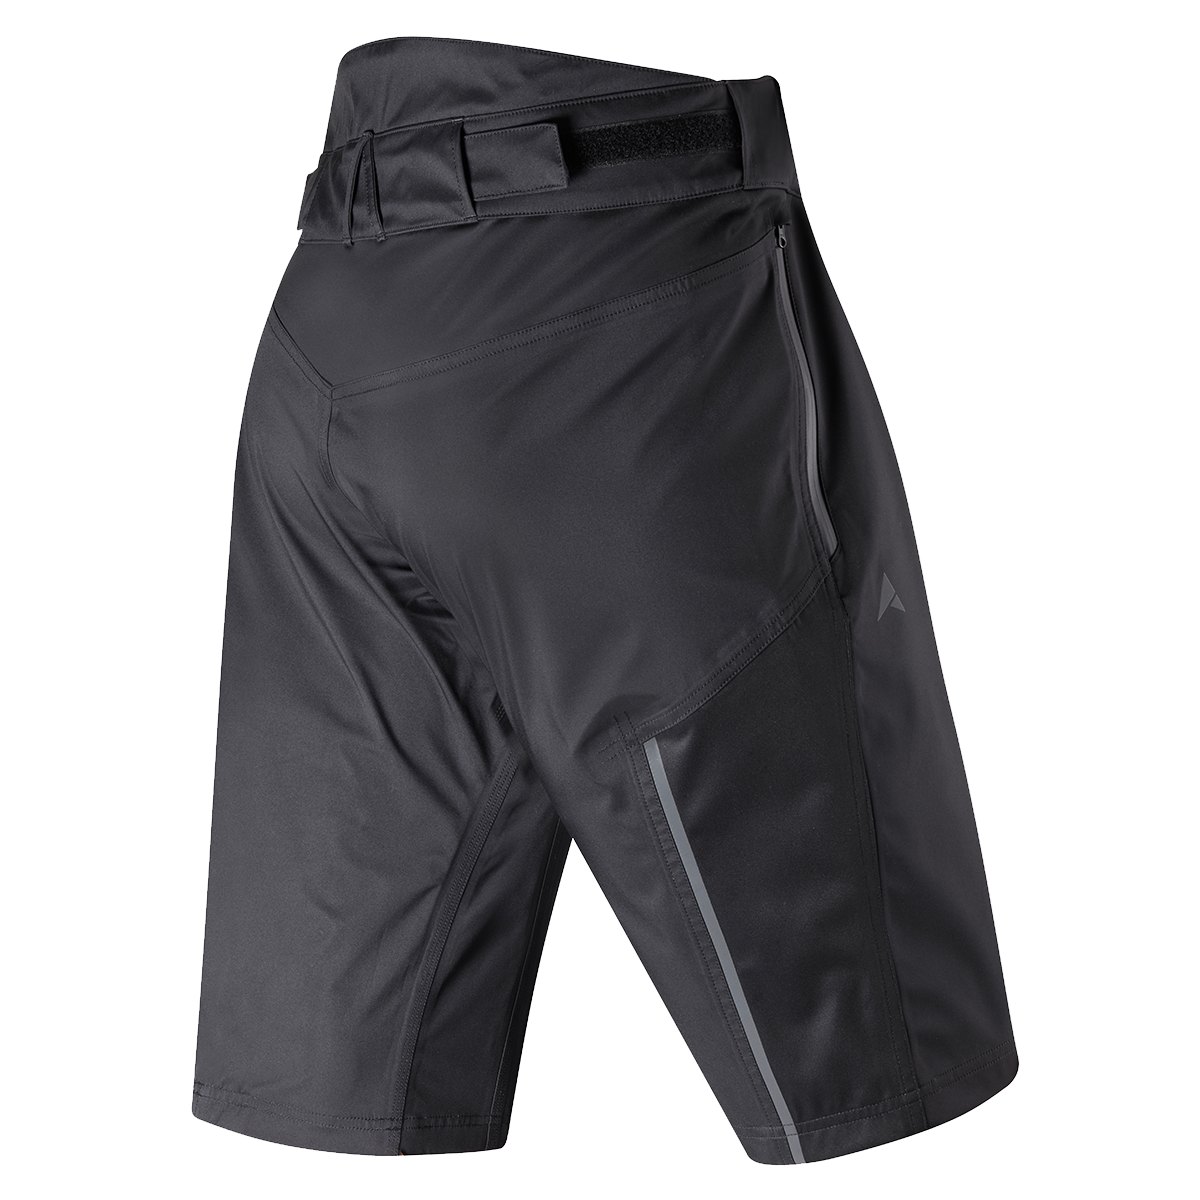 Altura All Roads Waterproof Shorts - Shorts - Cycle SuperStore